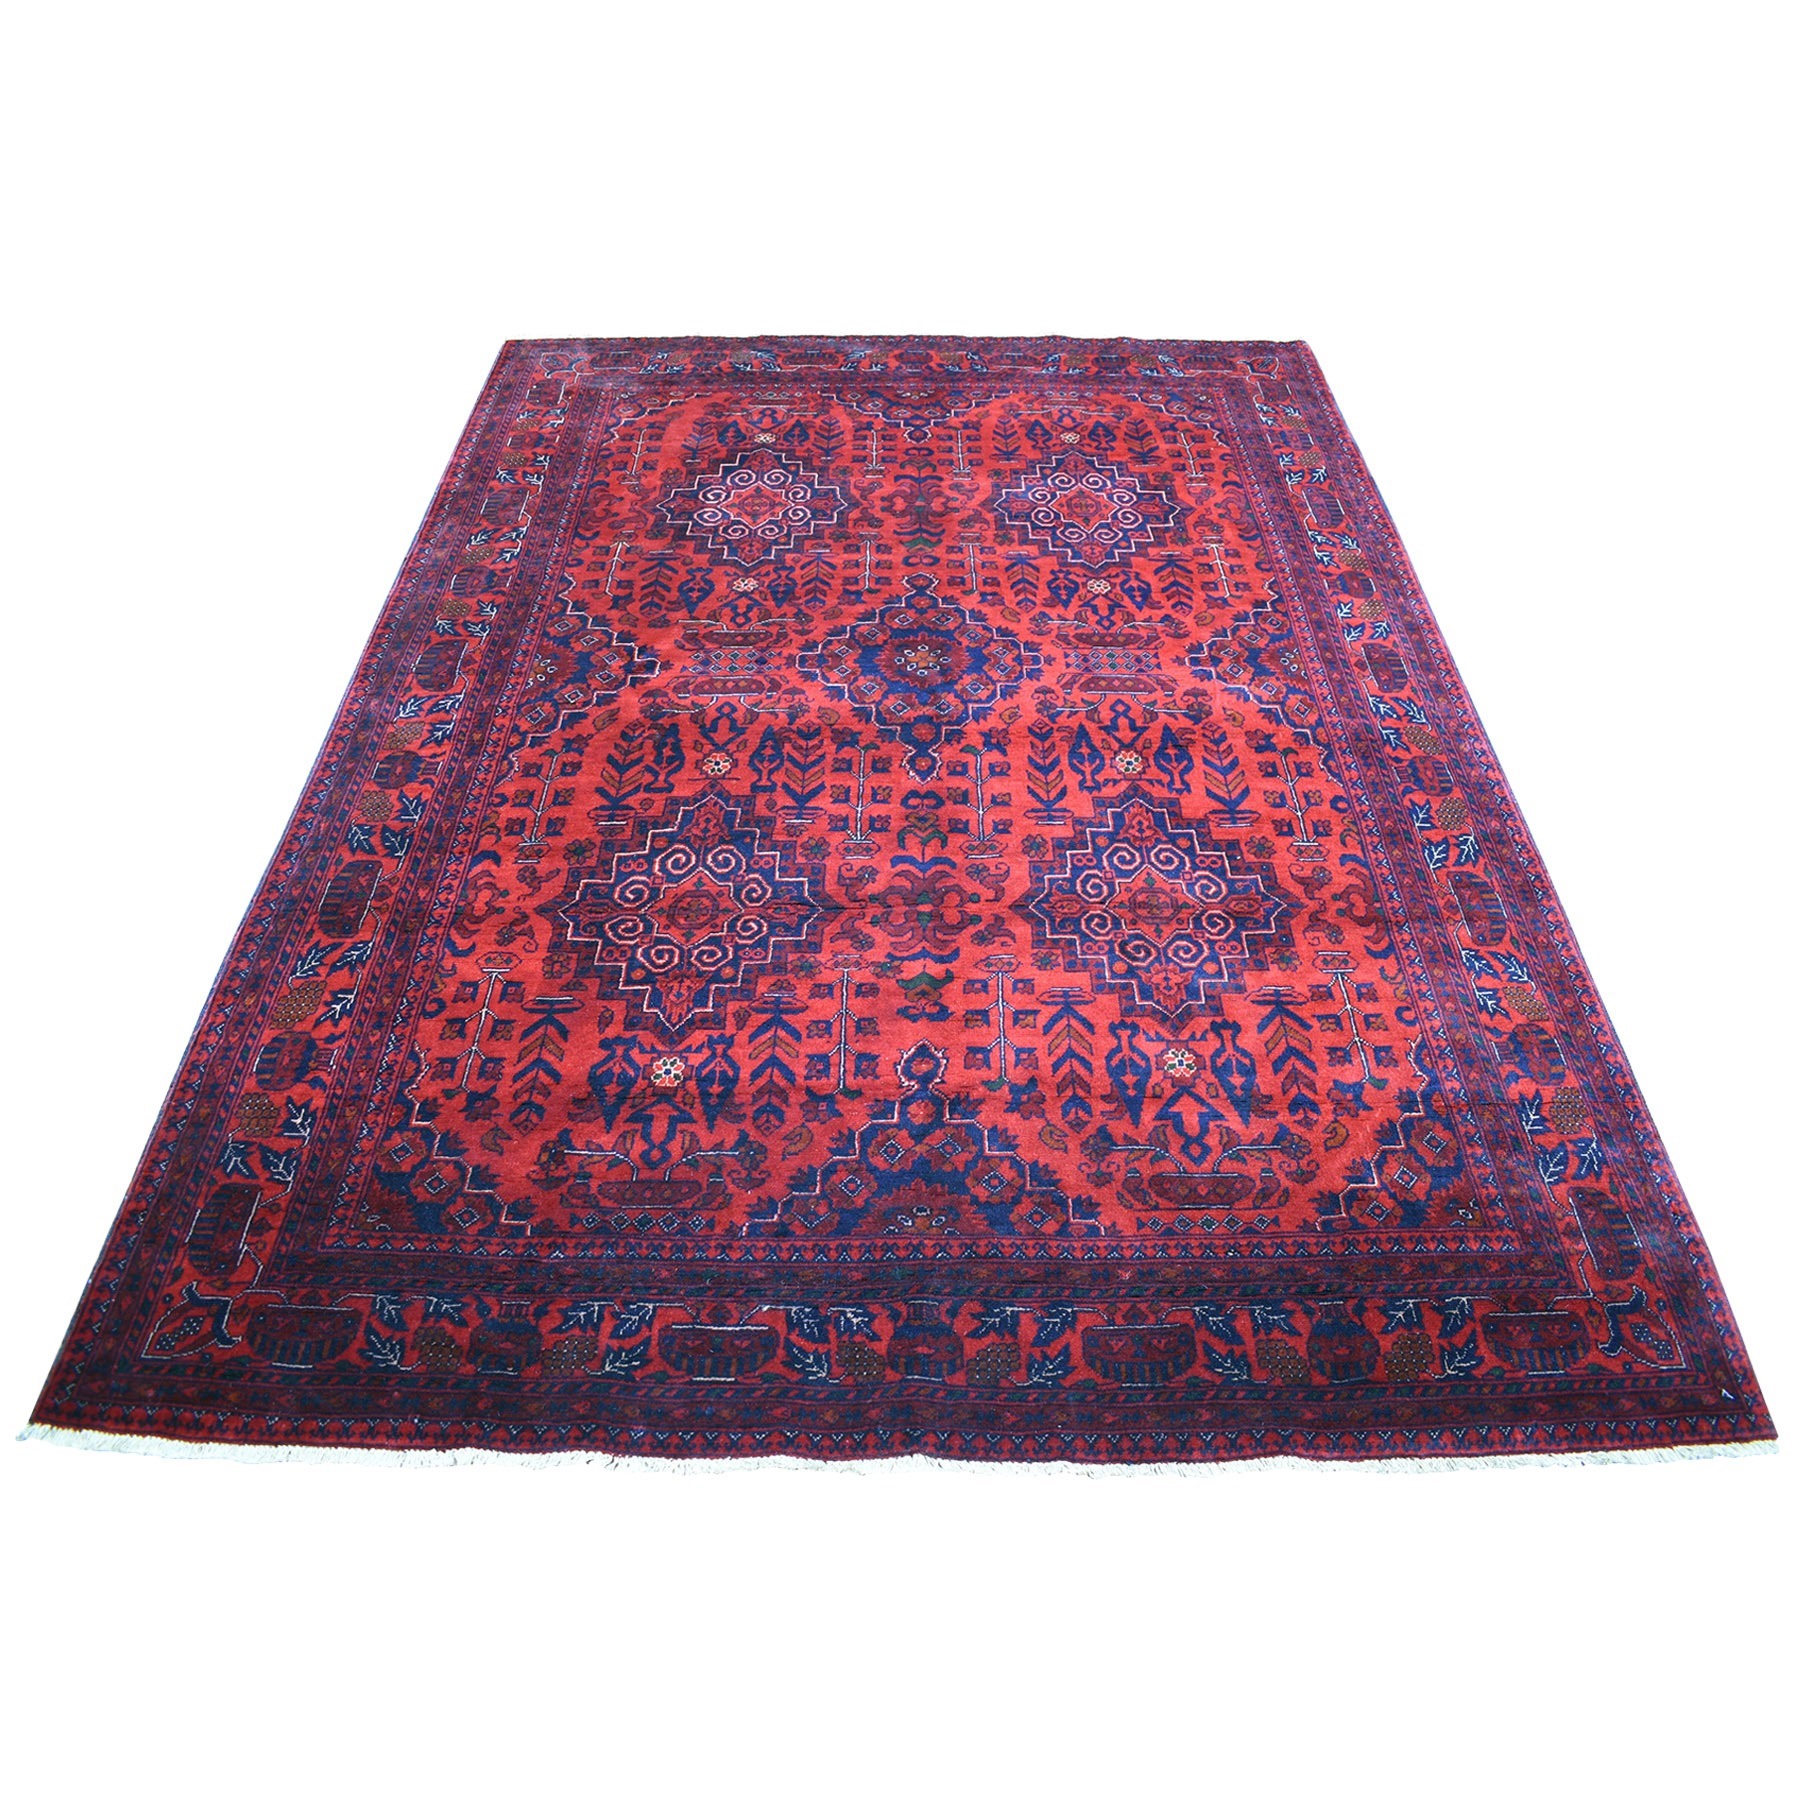 5'9"x8' Hand Woven Deep and Saturated Red Afghan Khamyab Medallions Design Soft Organic Wool Oriental Rug 